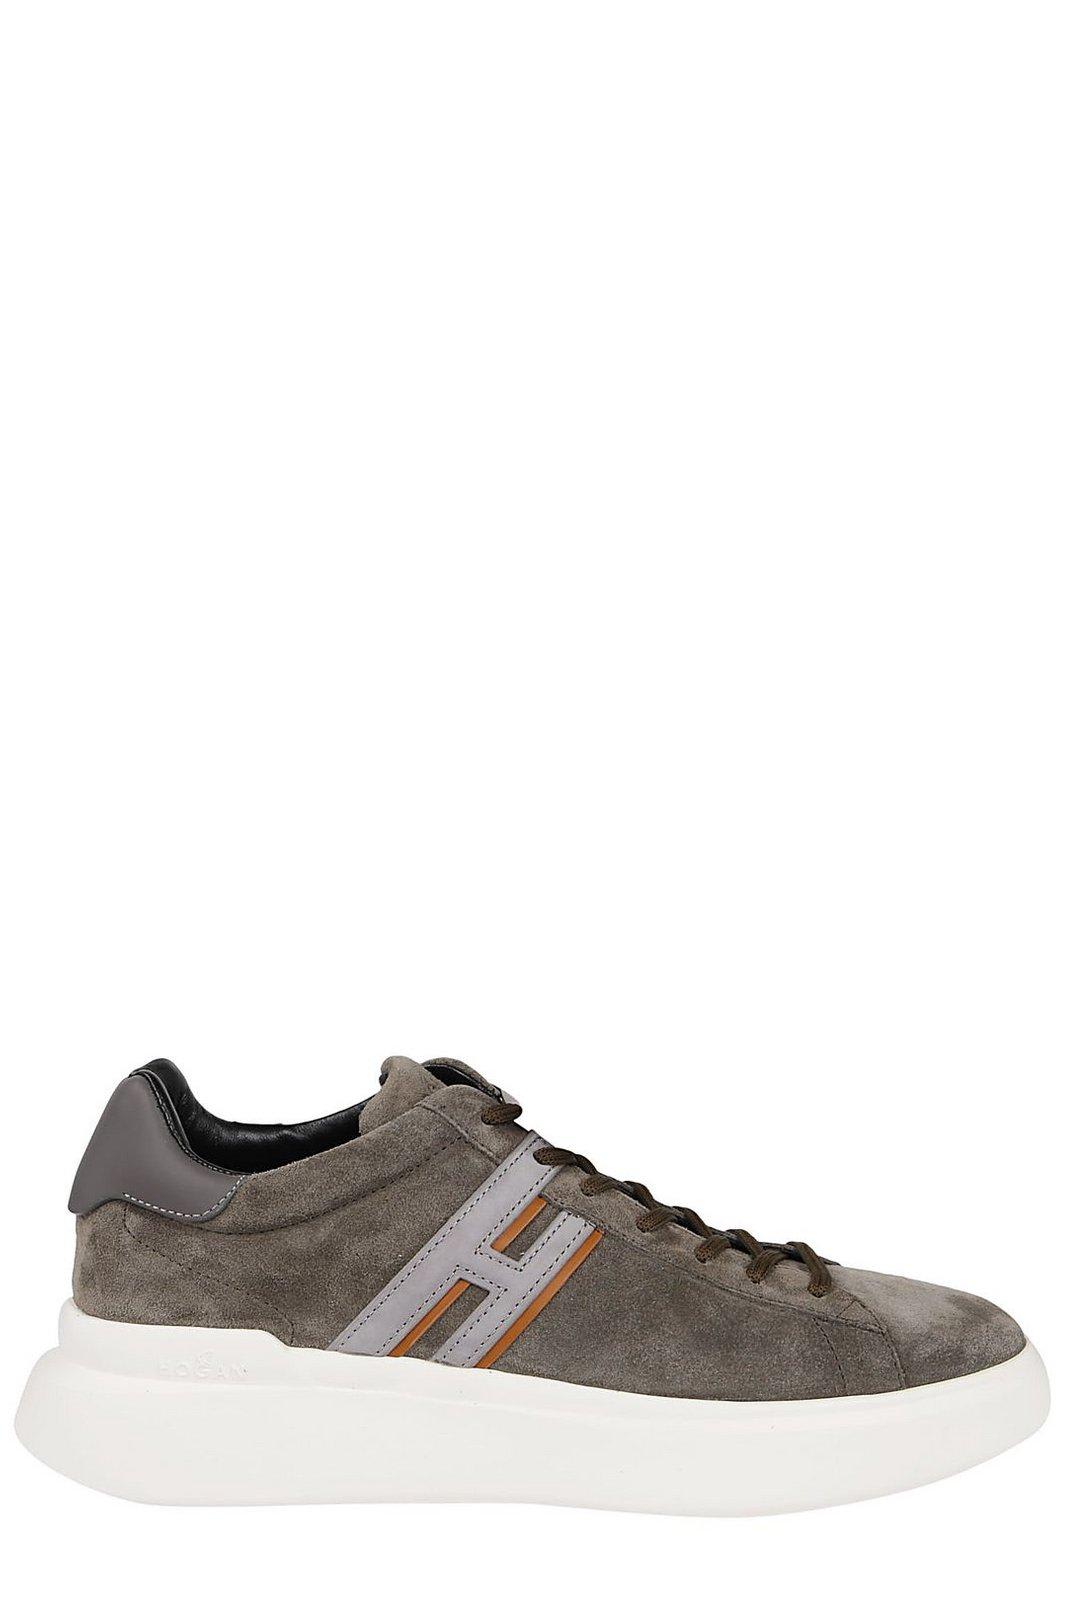 Shop Hogan H580 Lace-up Sneakers In Brown